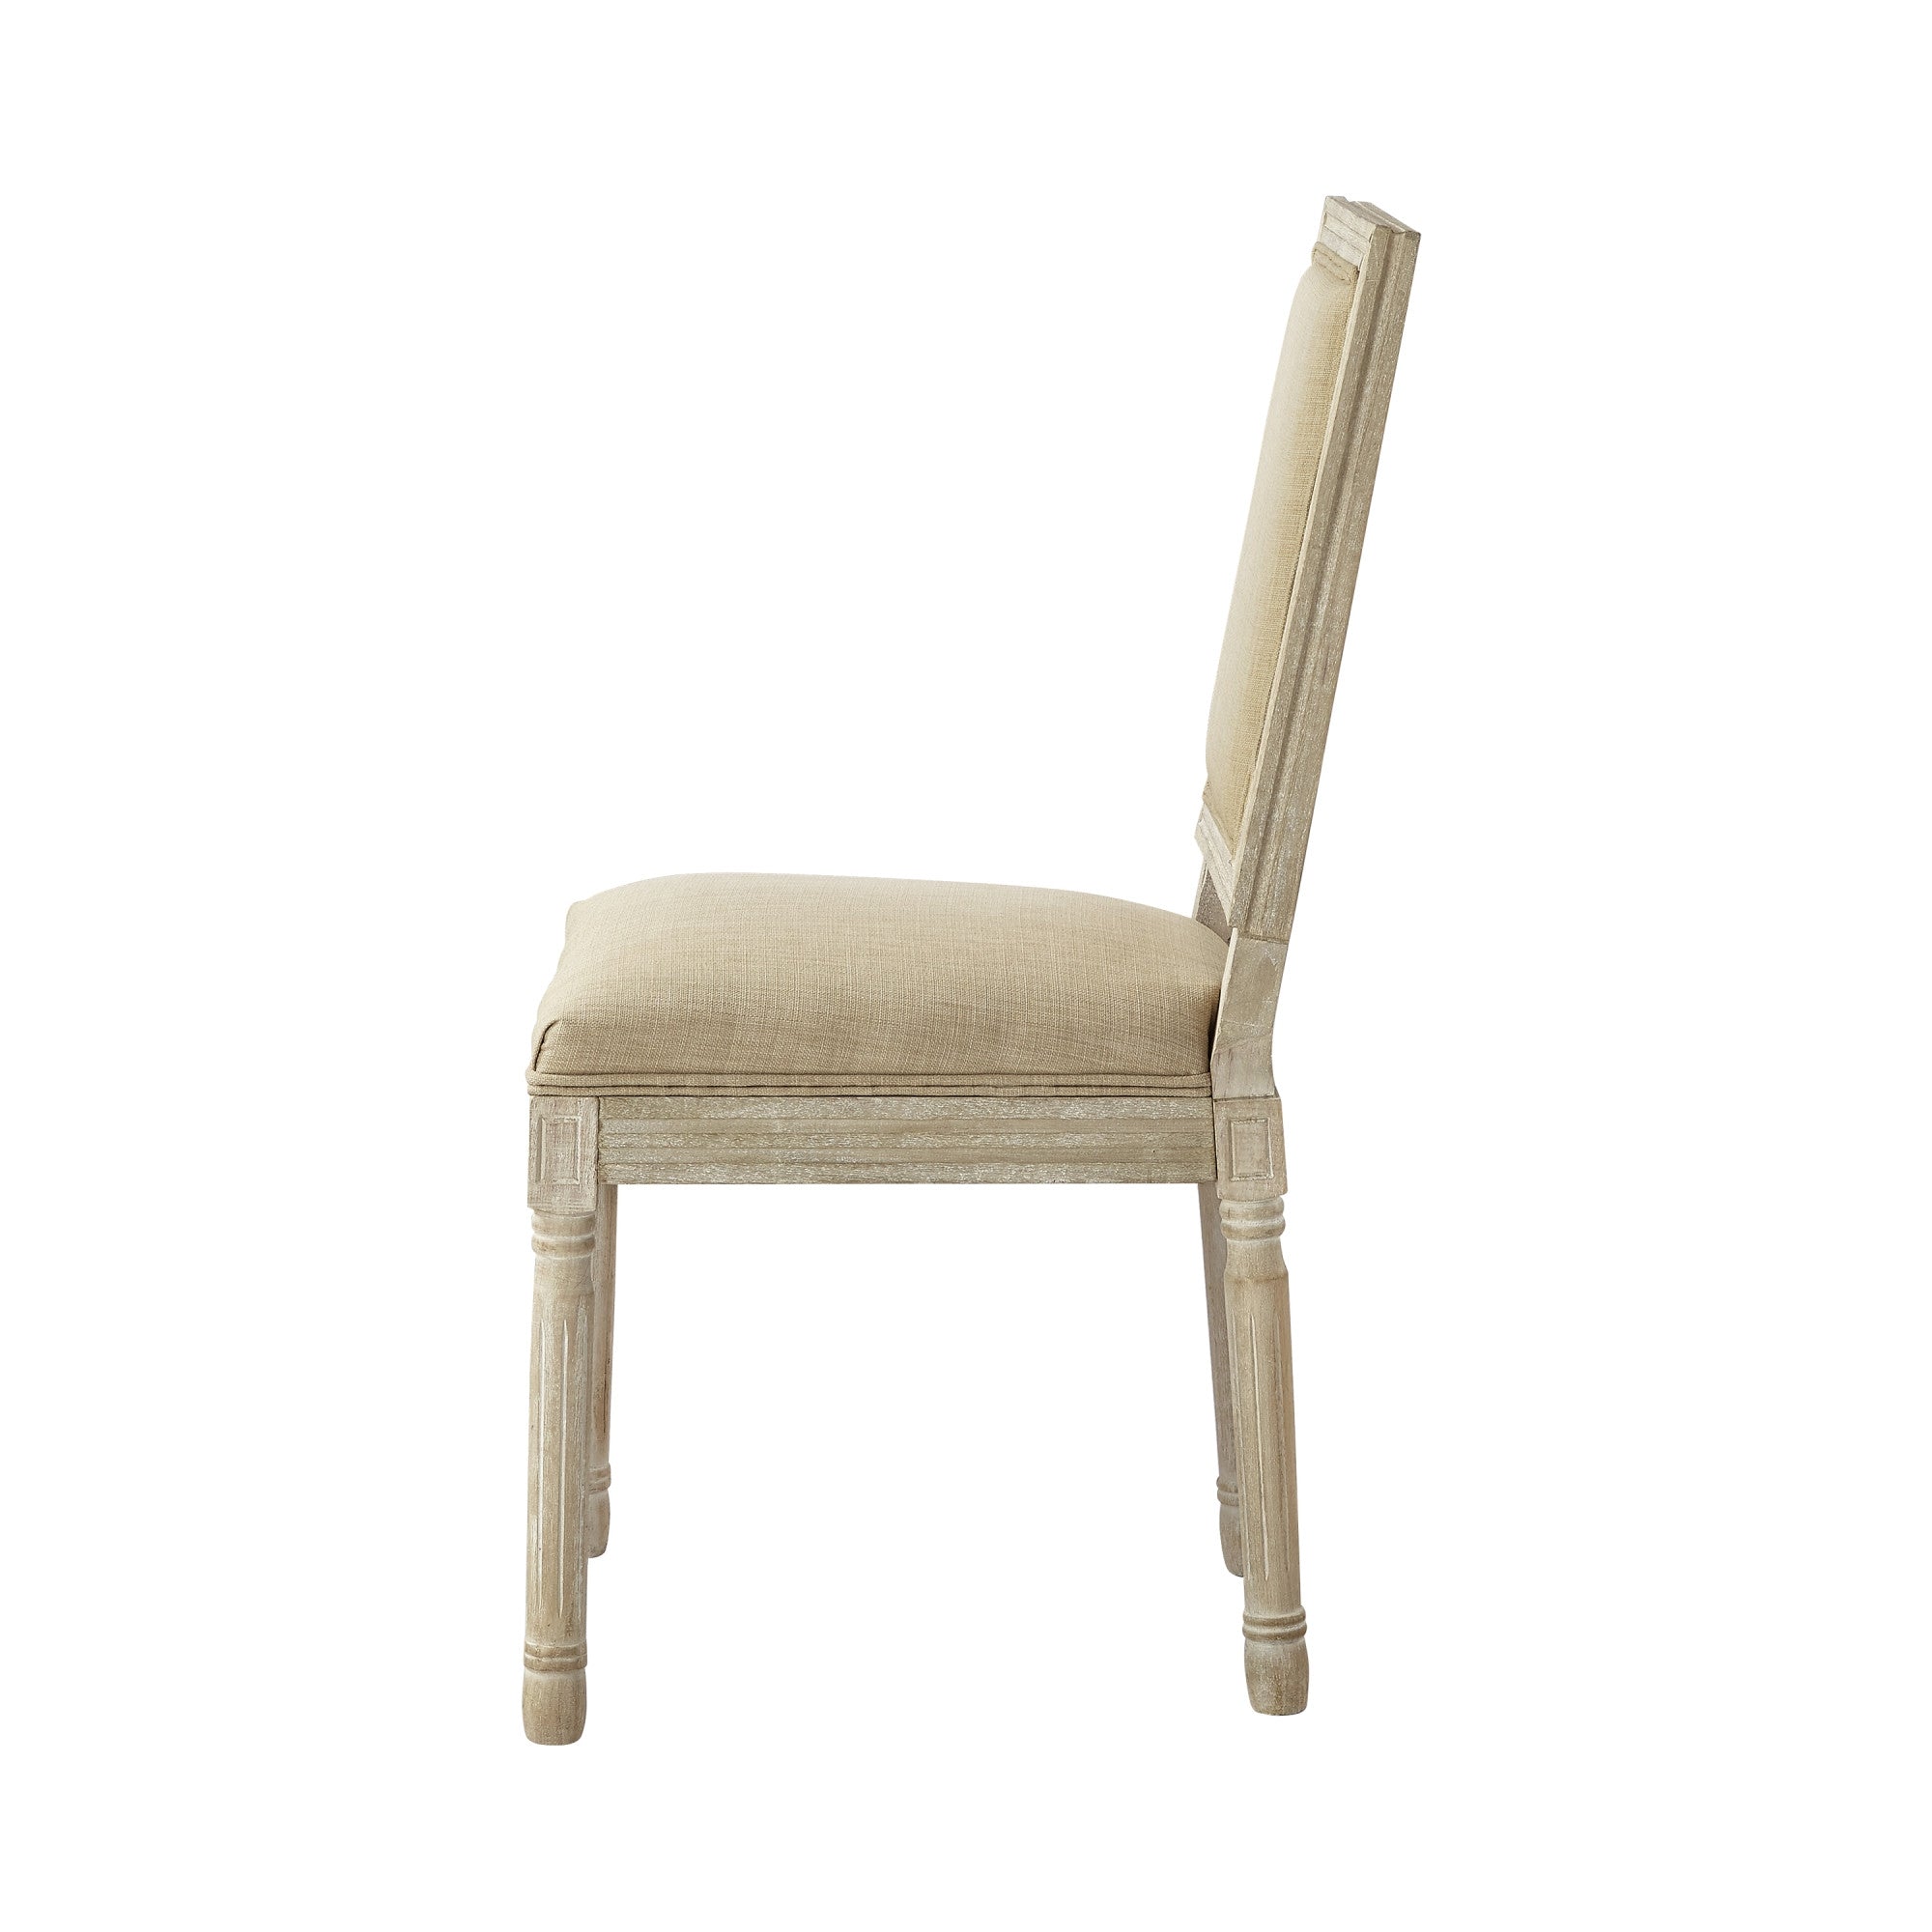 Set of Two Beige and Brown Upholstered Linen Dining Side Chairs